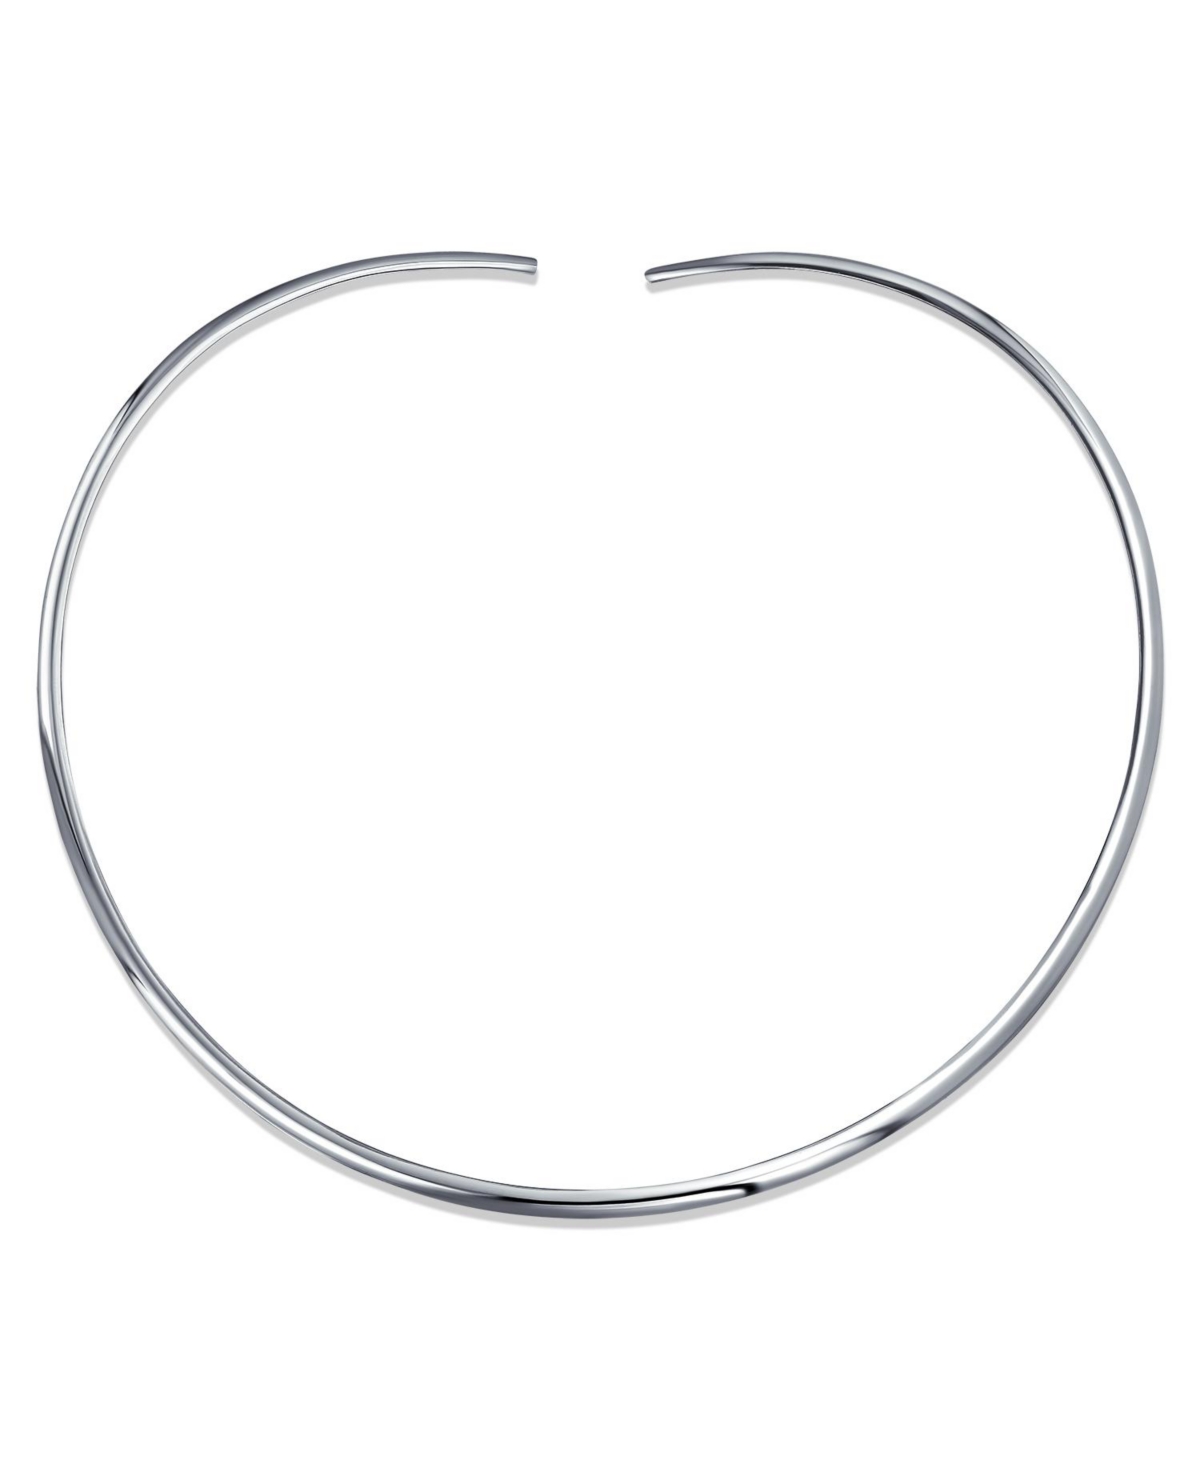 Classic Simple Plain Flat Slider Contoured Collar Curved Choker Necklace For Women Polished.925 Silver Sterling 3MM - Silver